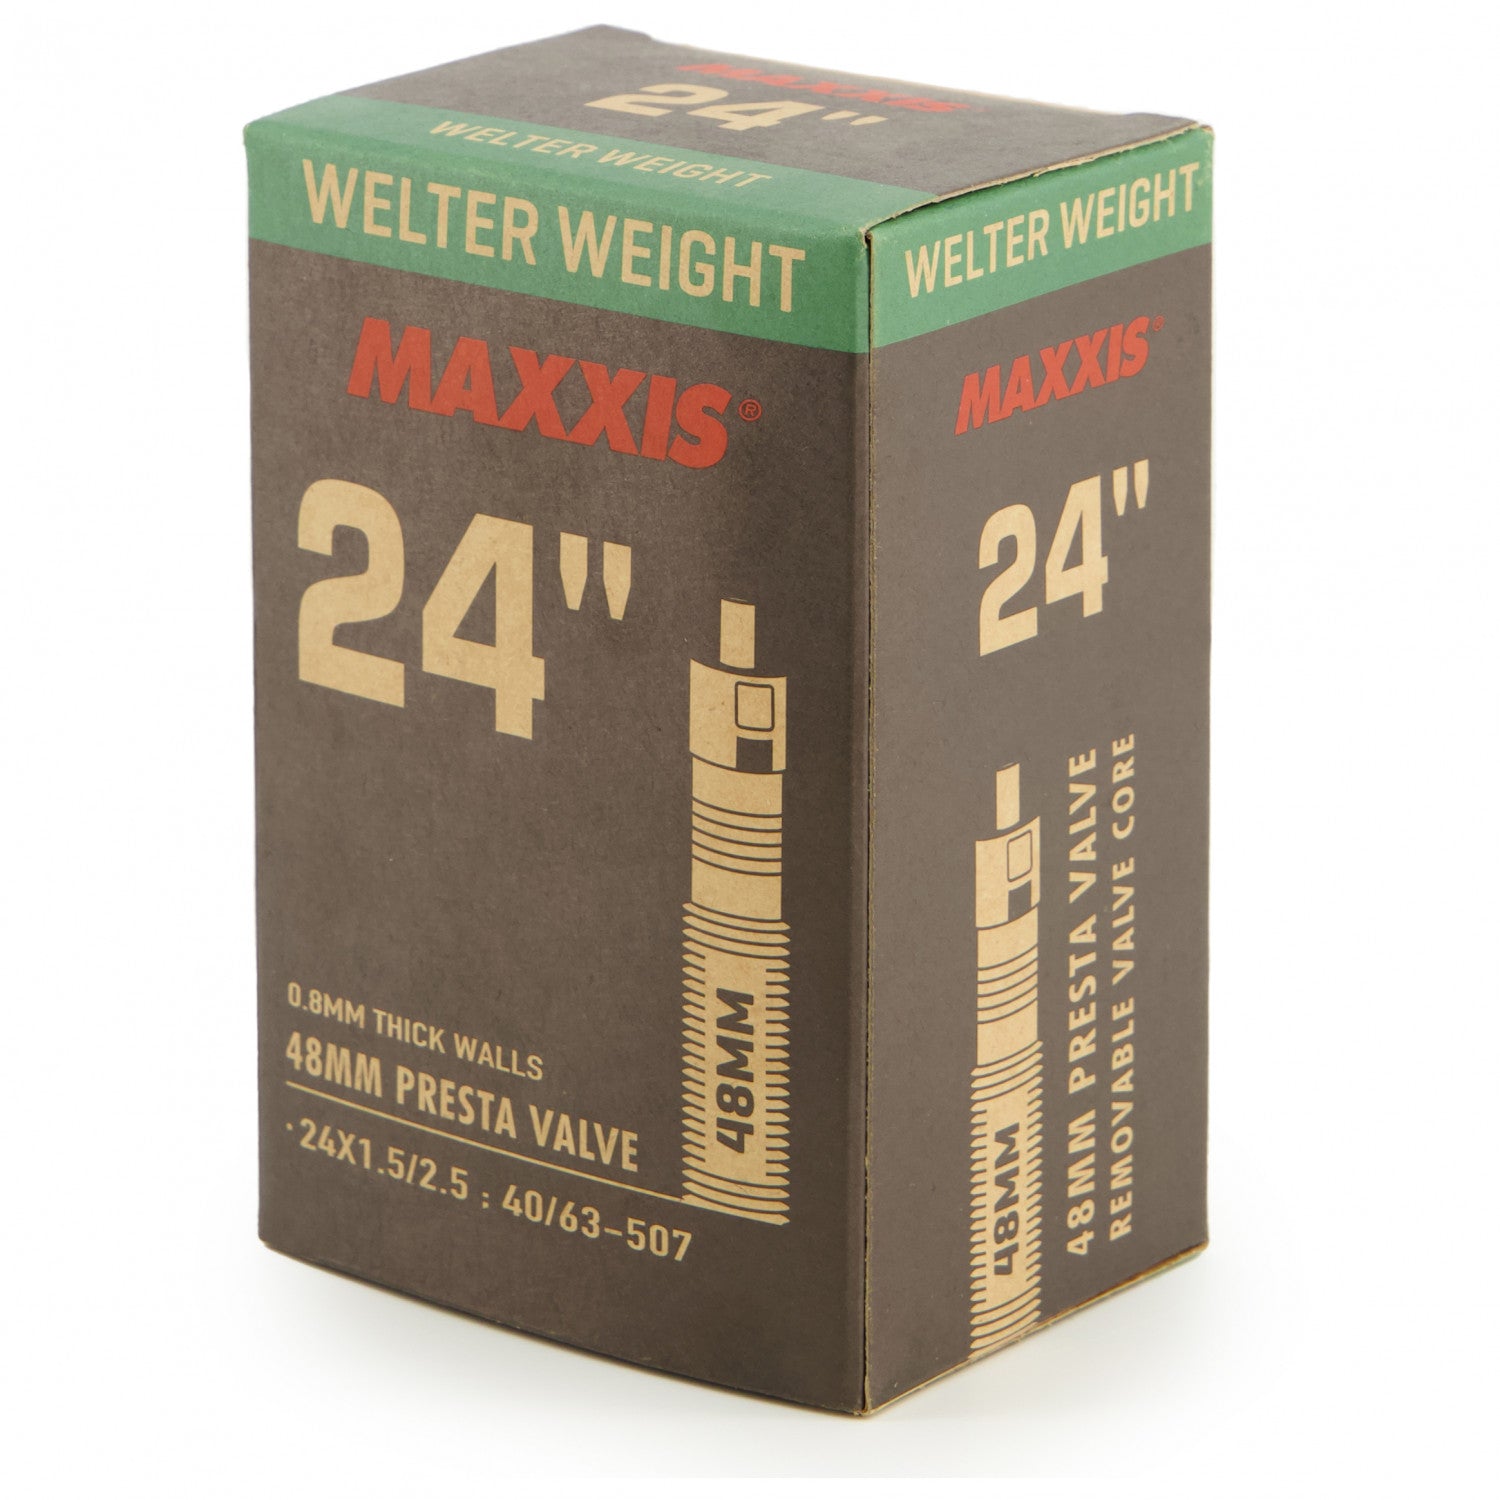 A box of Maxxis Welter Weight Presta Tubes now includes light tubes to save weight.